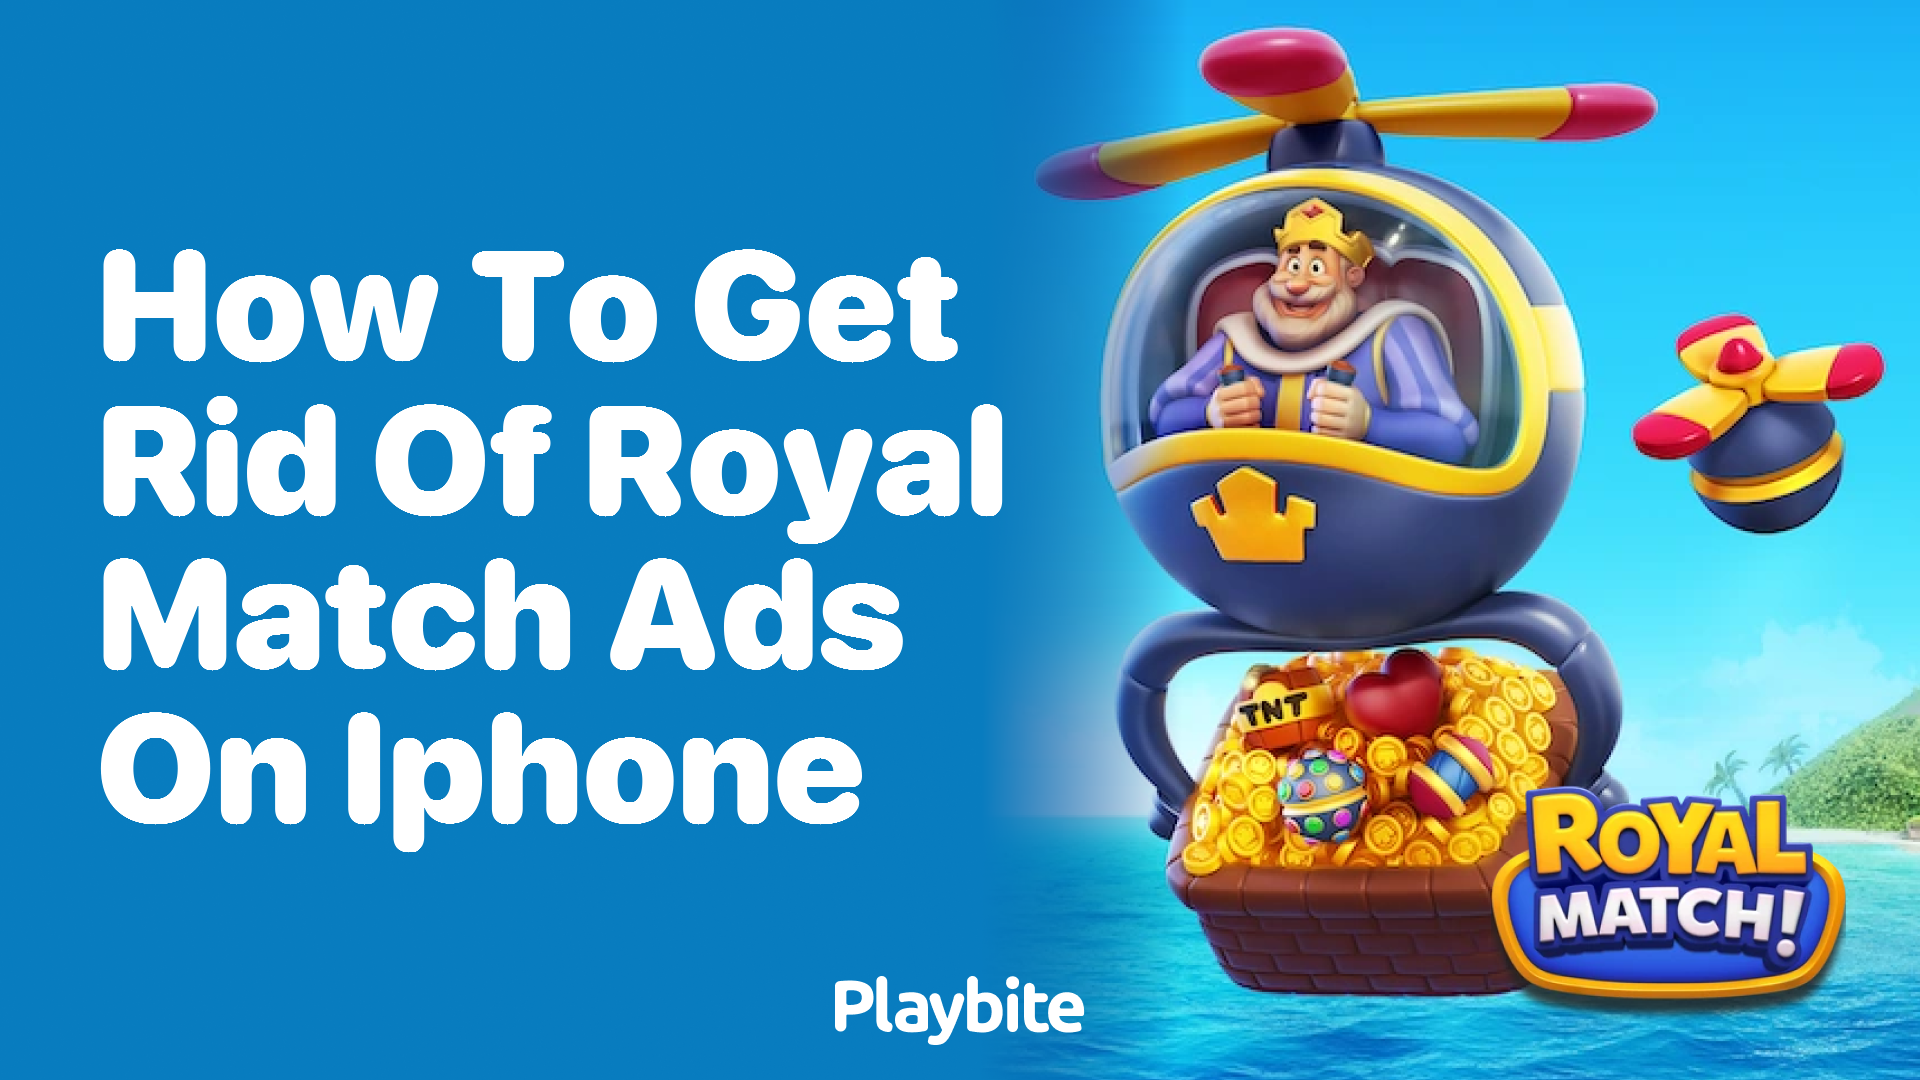 How to Get Rid of Royal Match Ads on iPhone